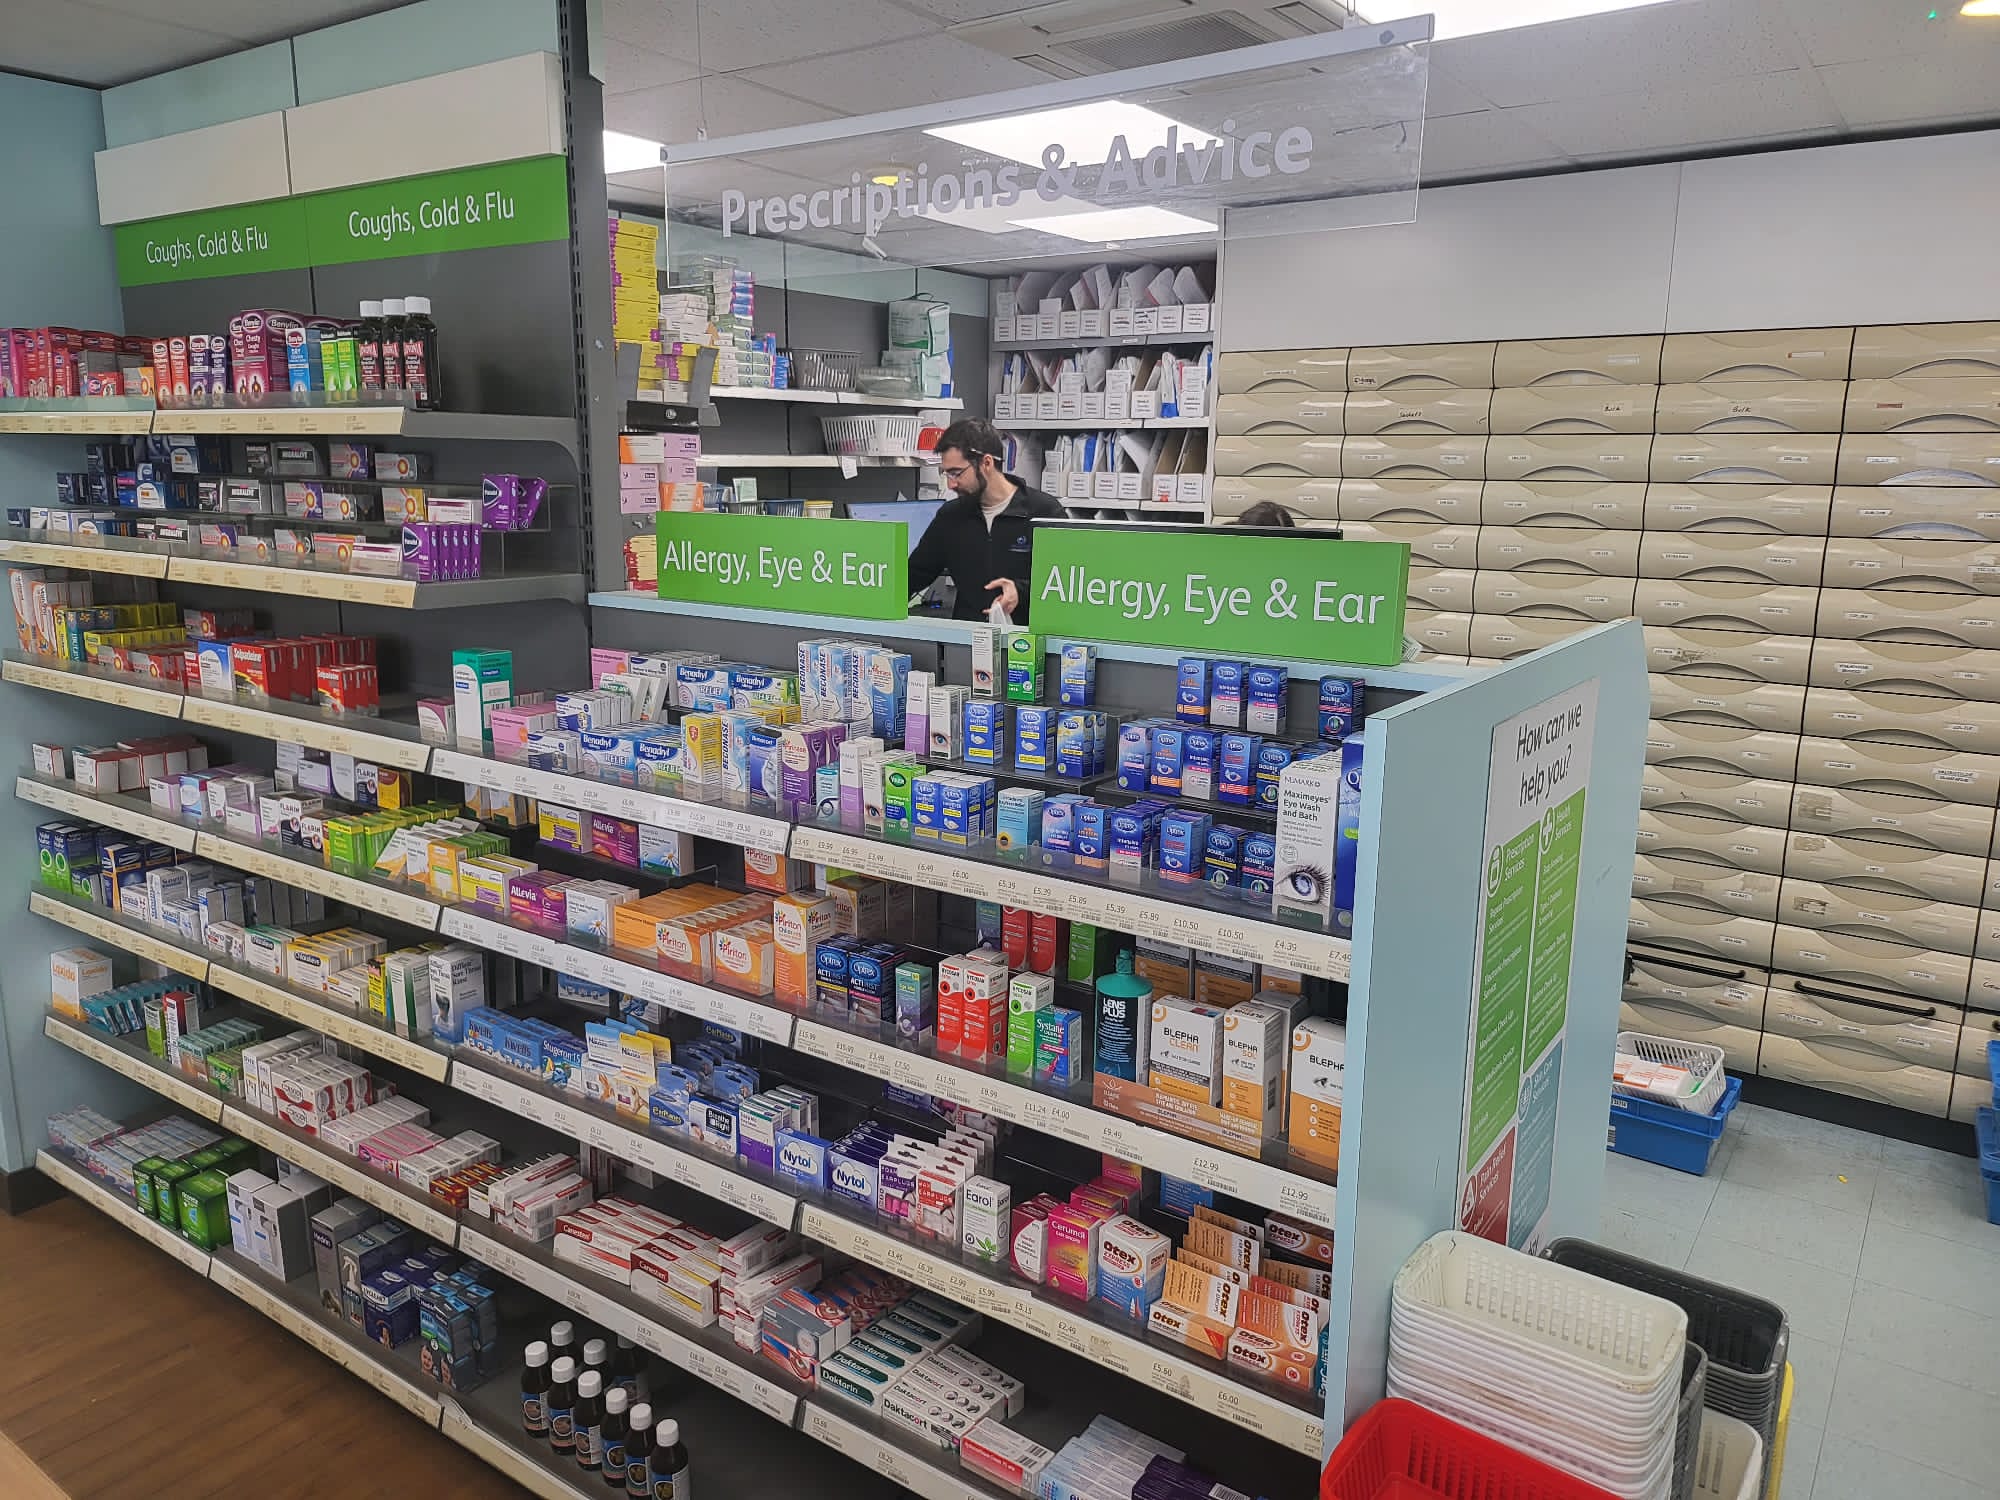 Inside Midsomer Pharmacy showing all the OTC medicines displayed on the shelves plus you can see a partial view of the back dispensary where prescription medicine is prepared for patients